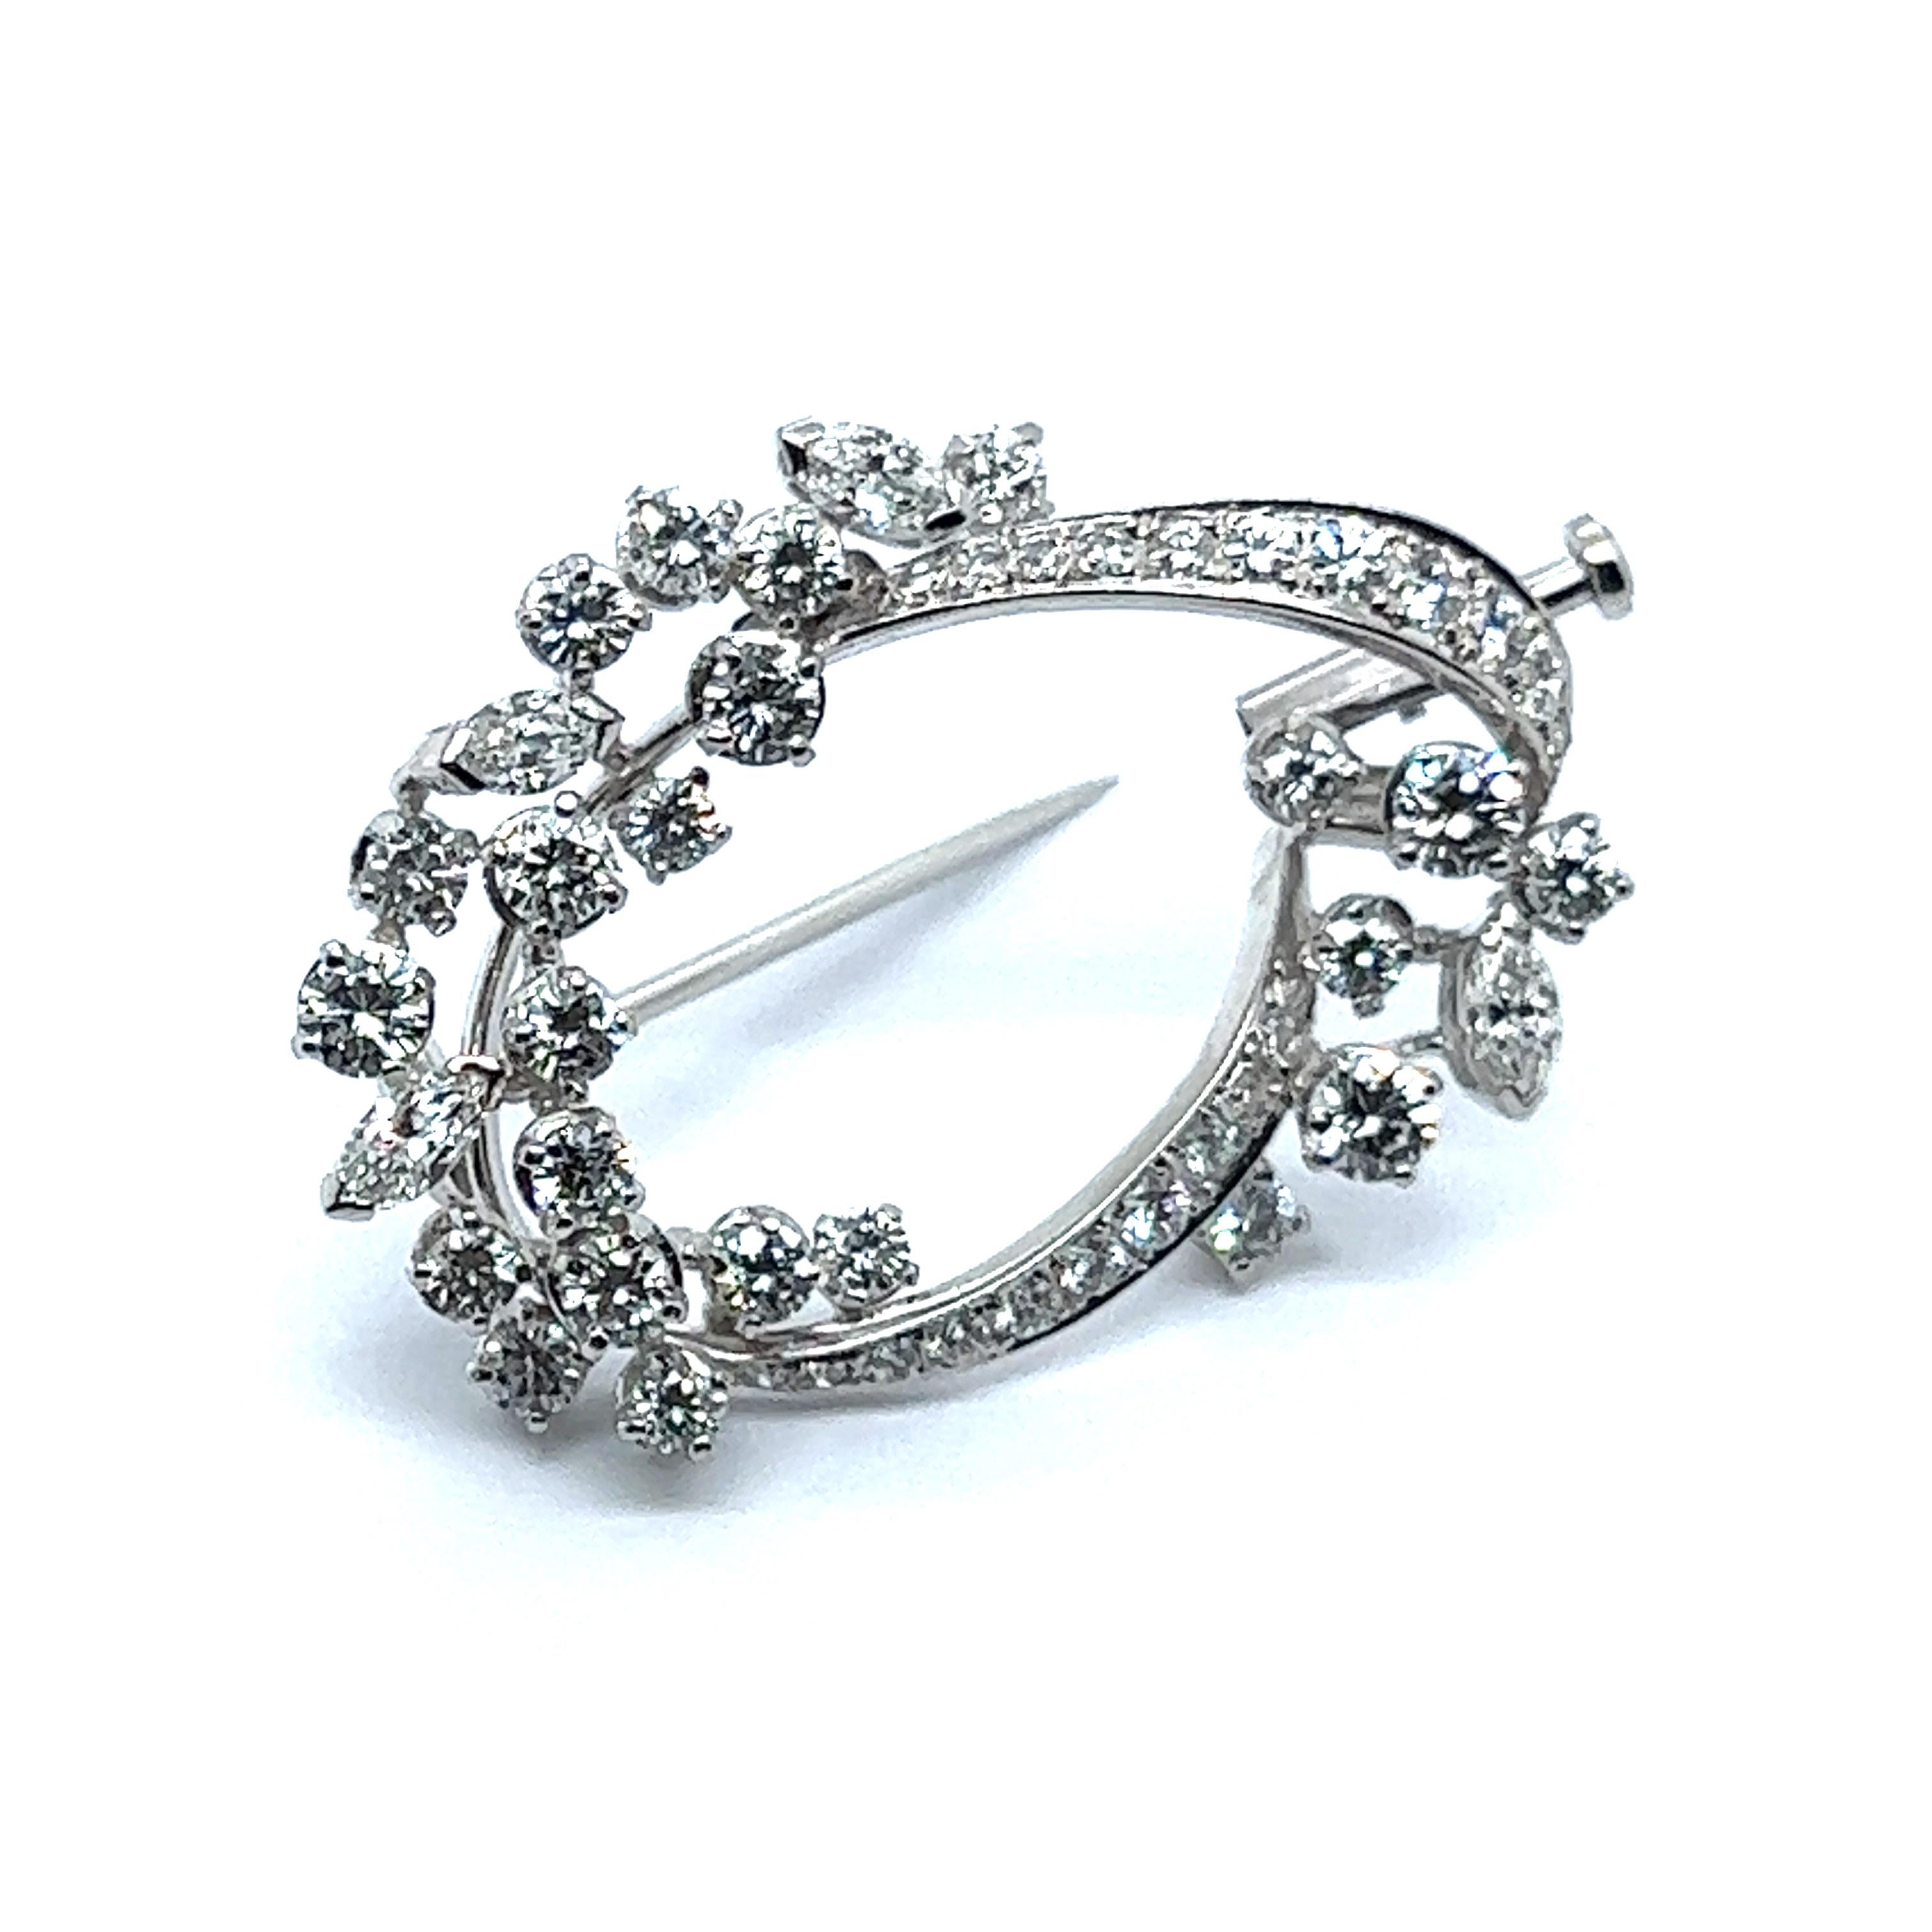 Floral Gübelin Brooch with Diamonds in 18 Karat White Gold For Sale 2